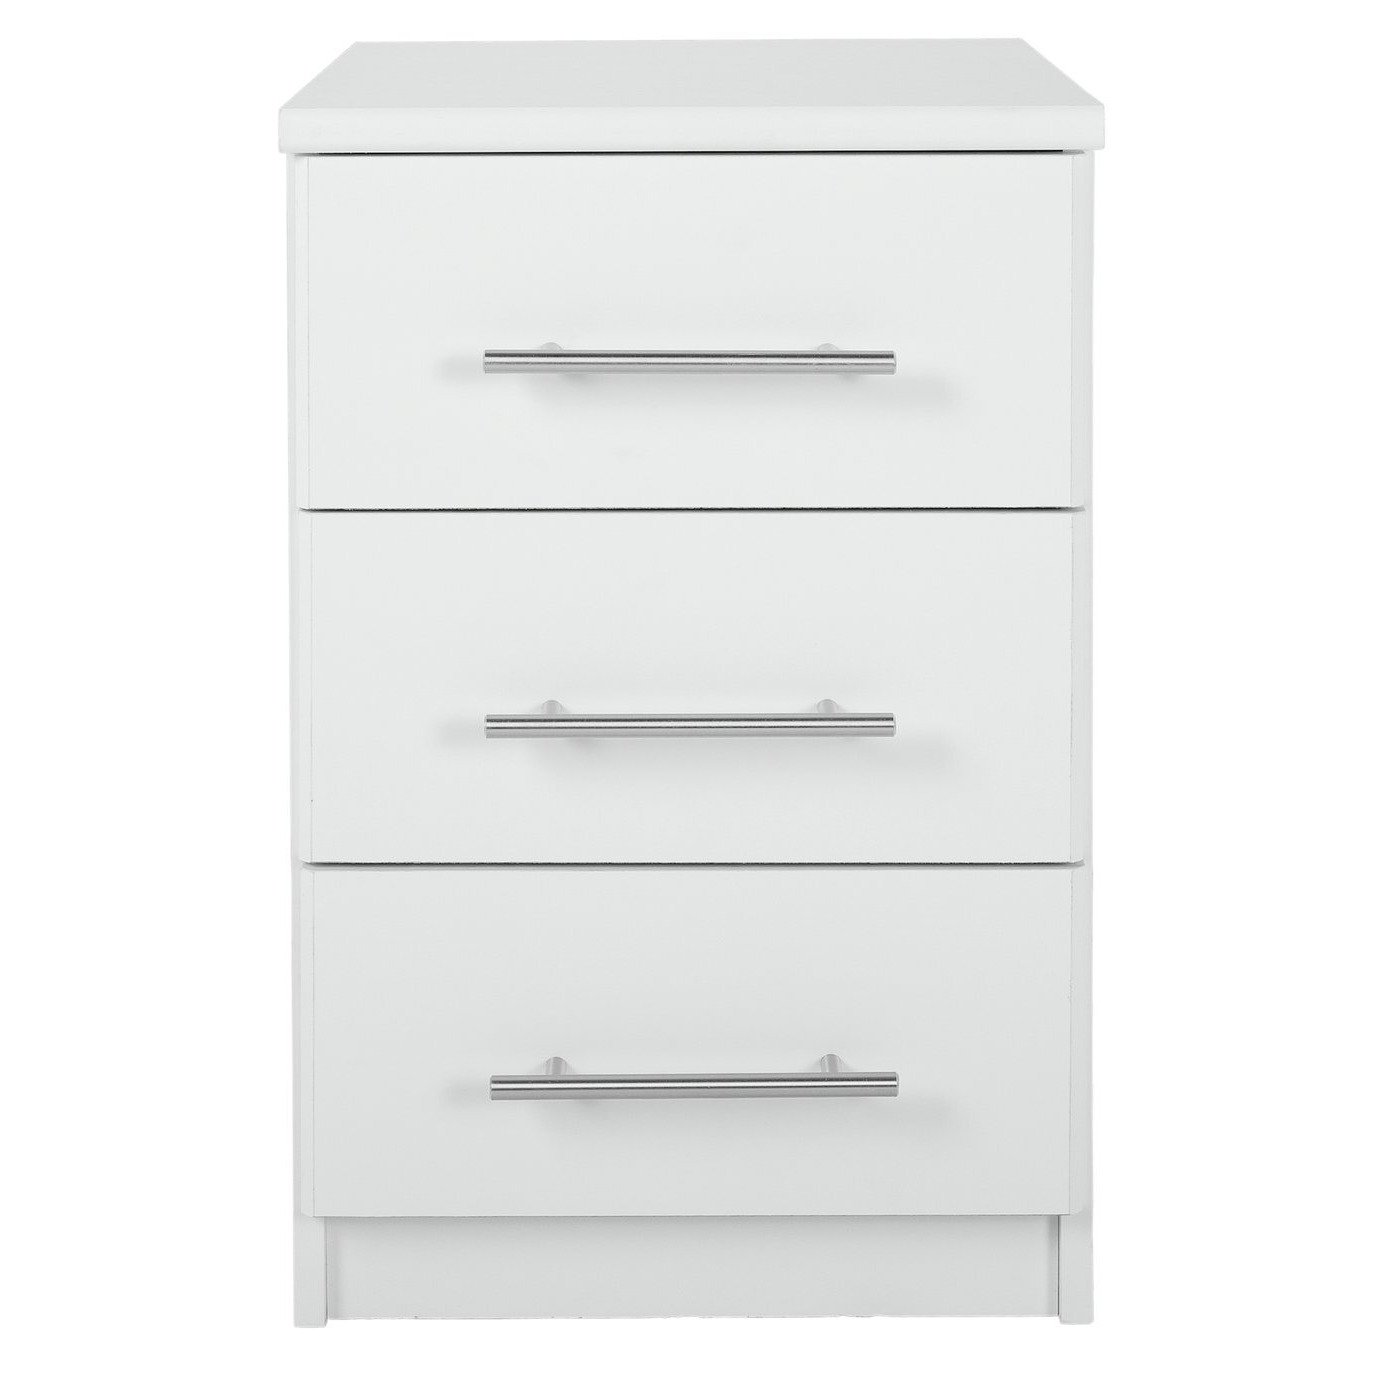 Argos Home Normandy 3 Drawer Bedside Table - White - image 1